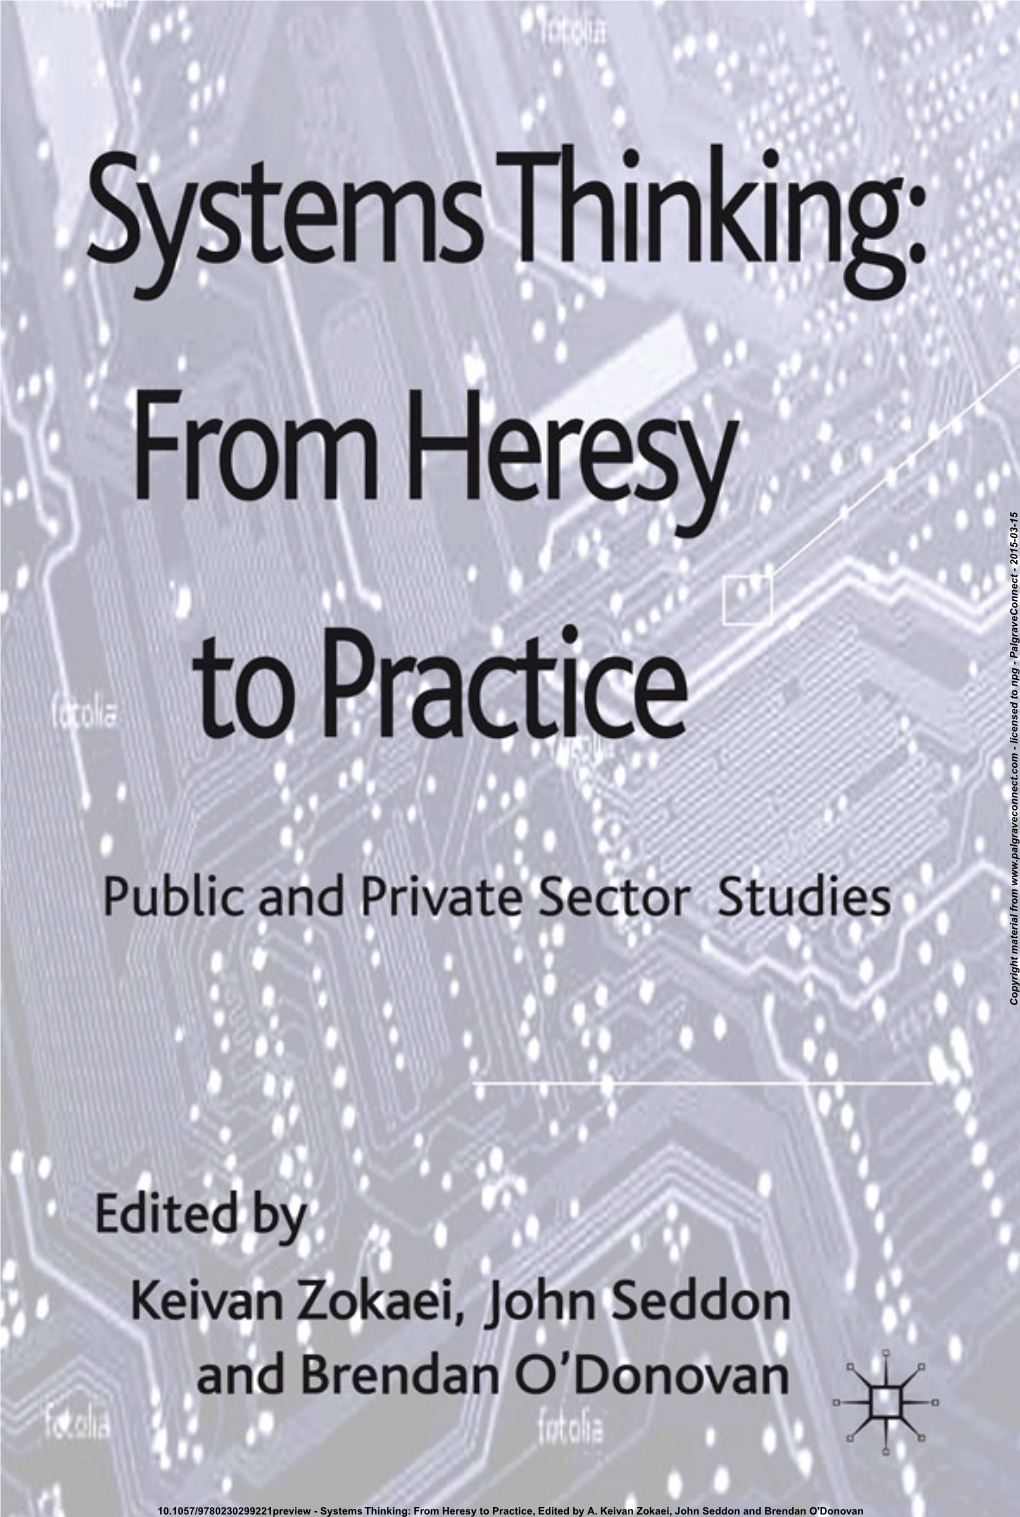 Systems Thinking: from Heresy to Practice, Edited by A